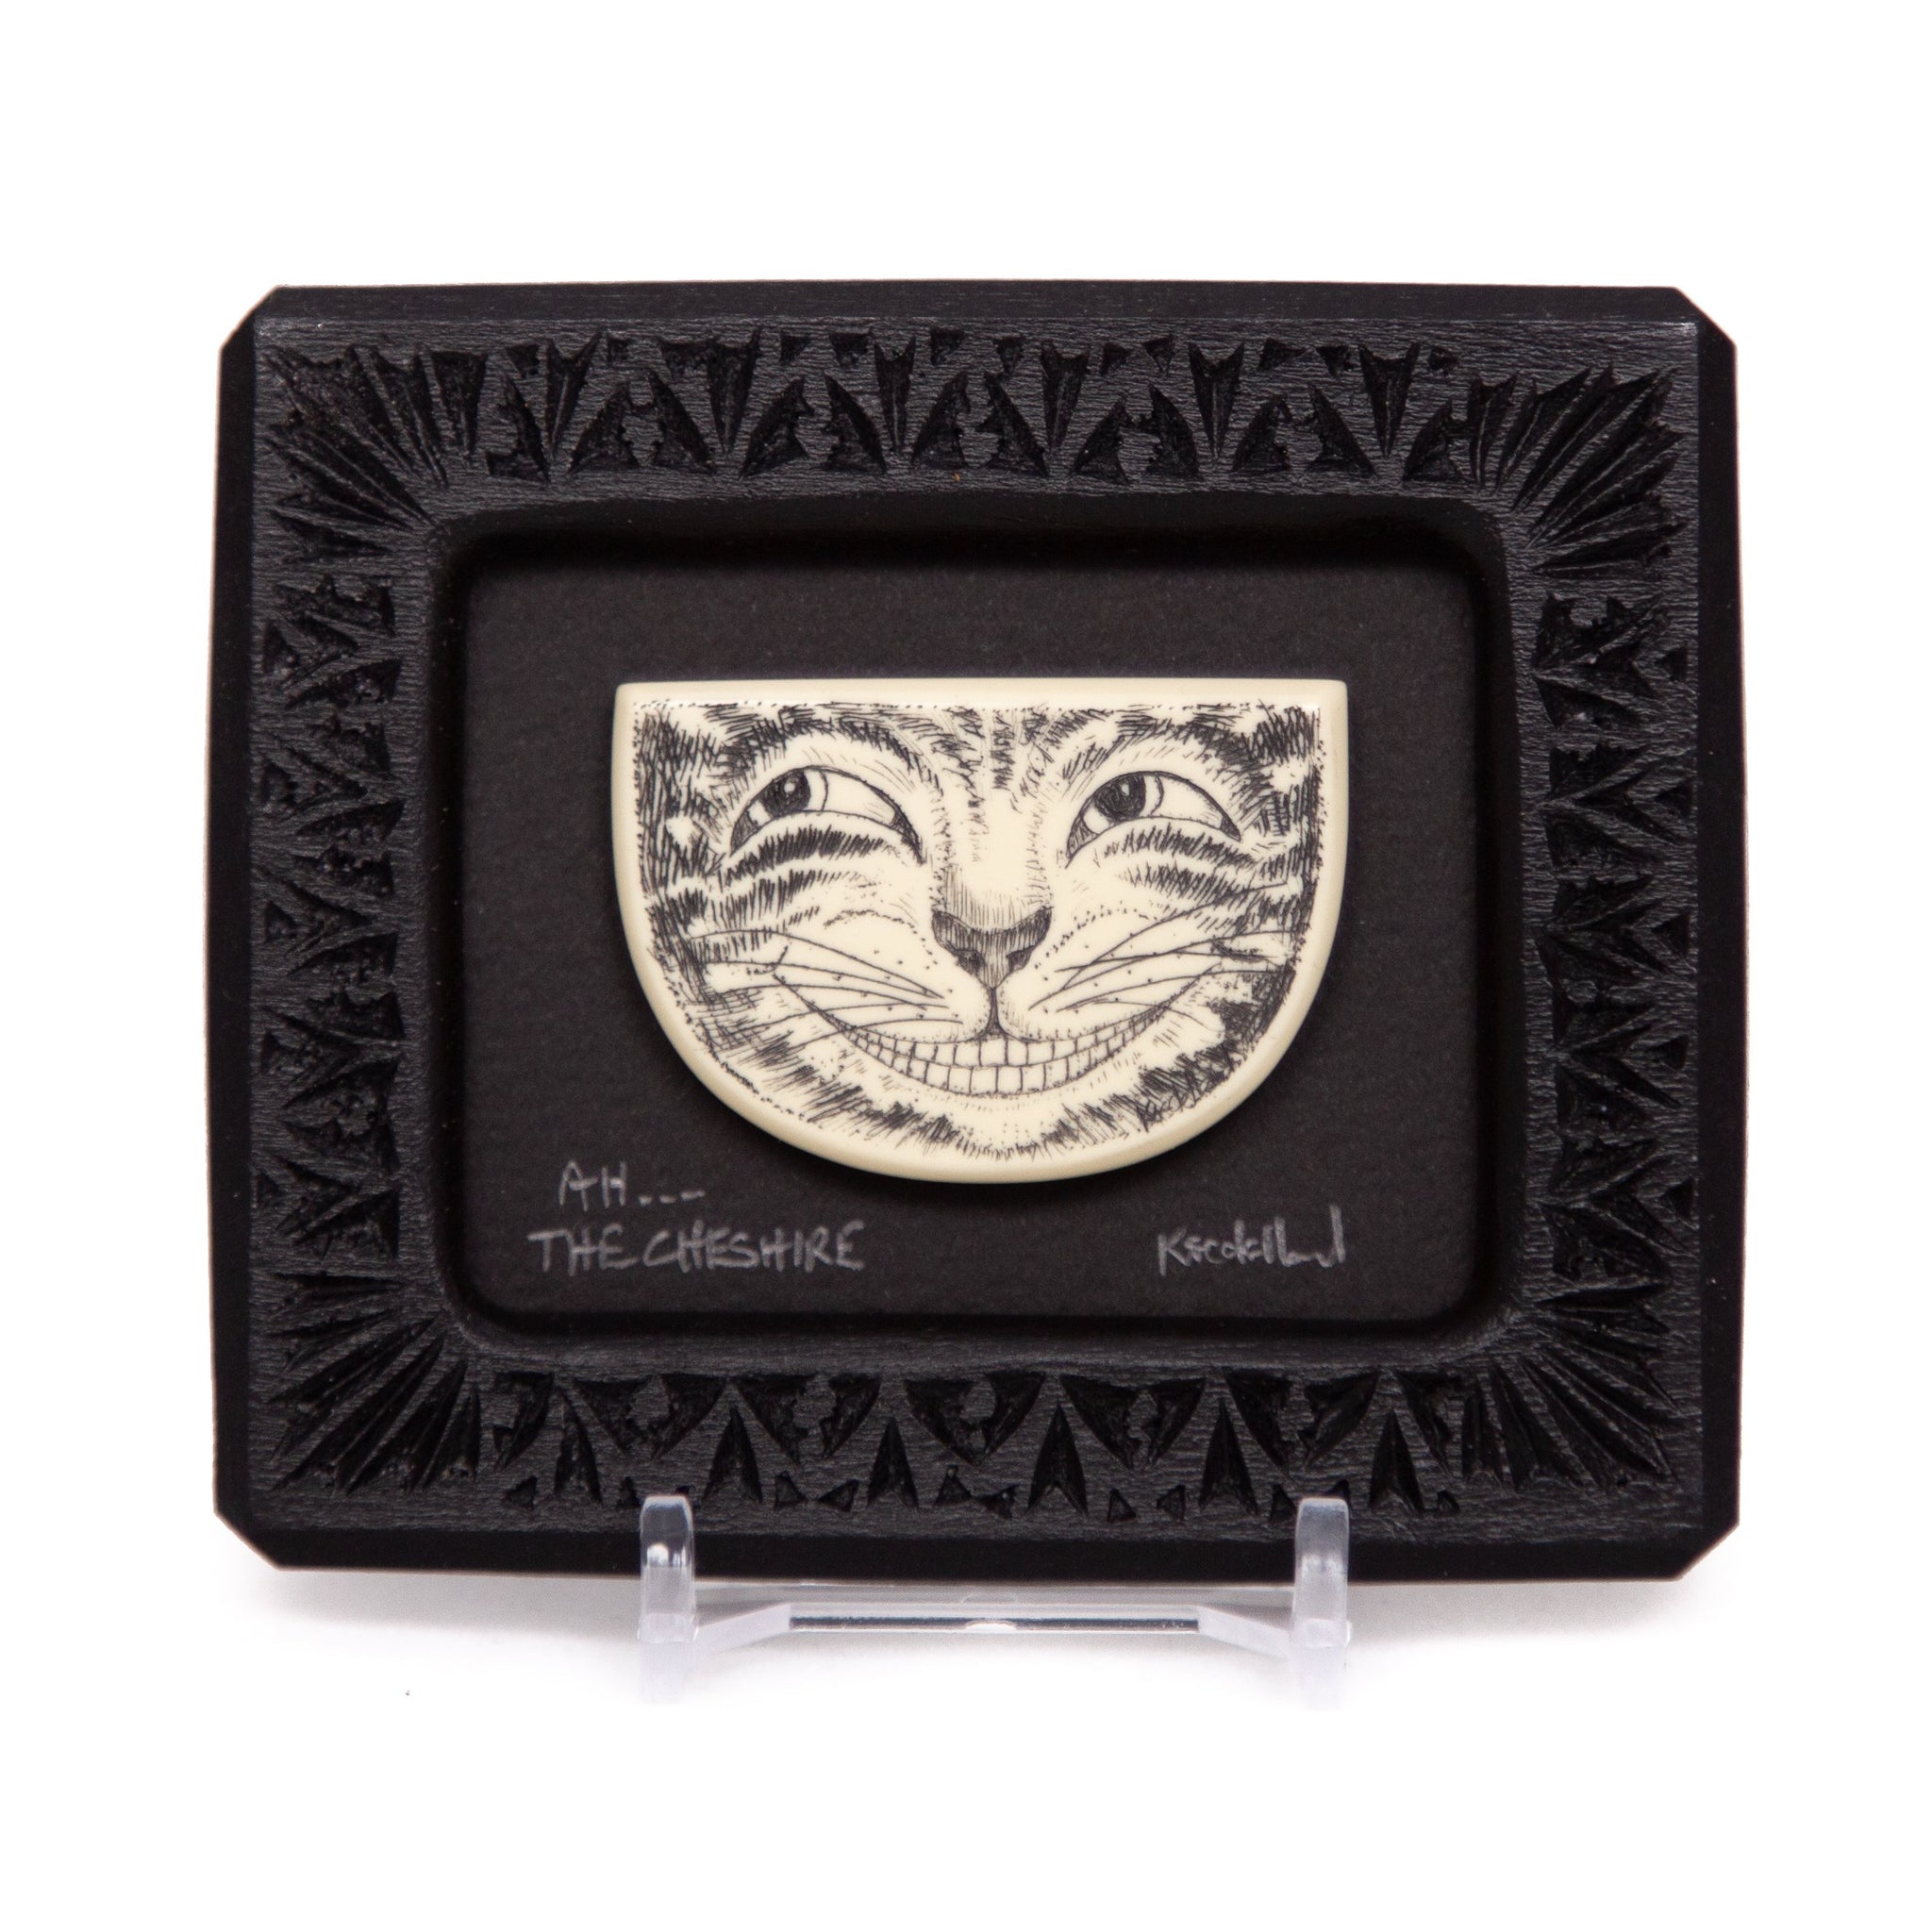 "Ah... The Cheshire" Small Chip Carved Frame